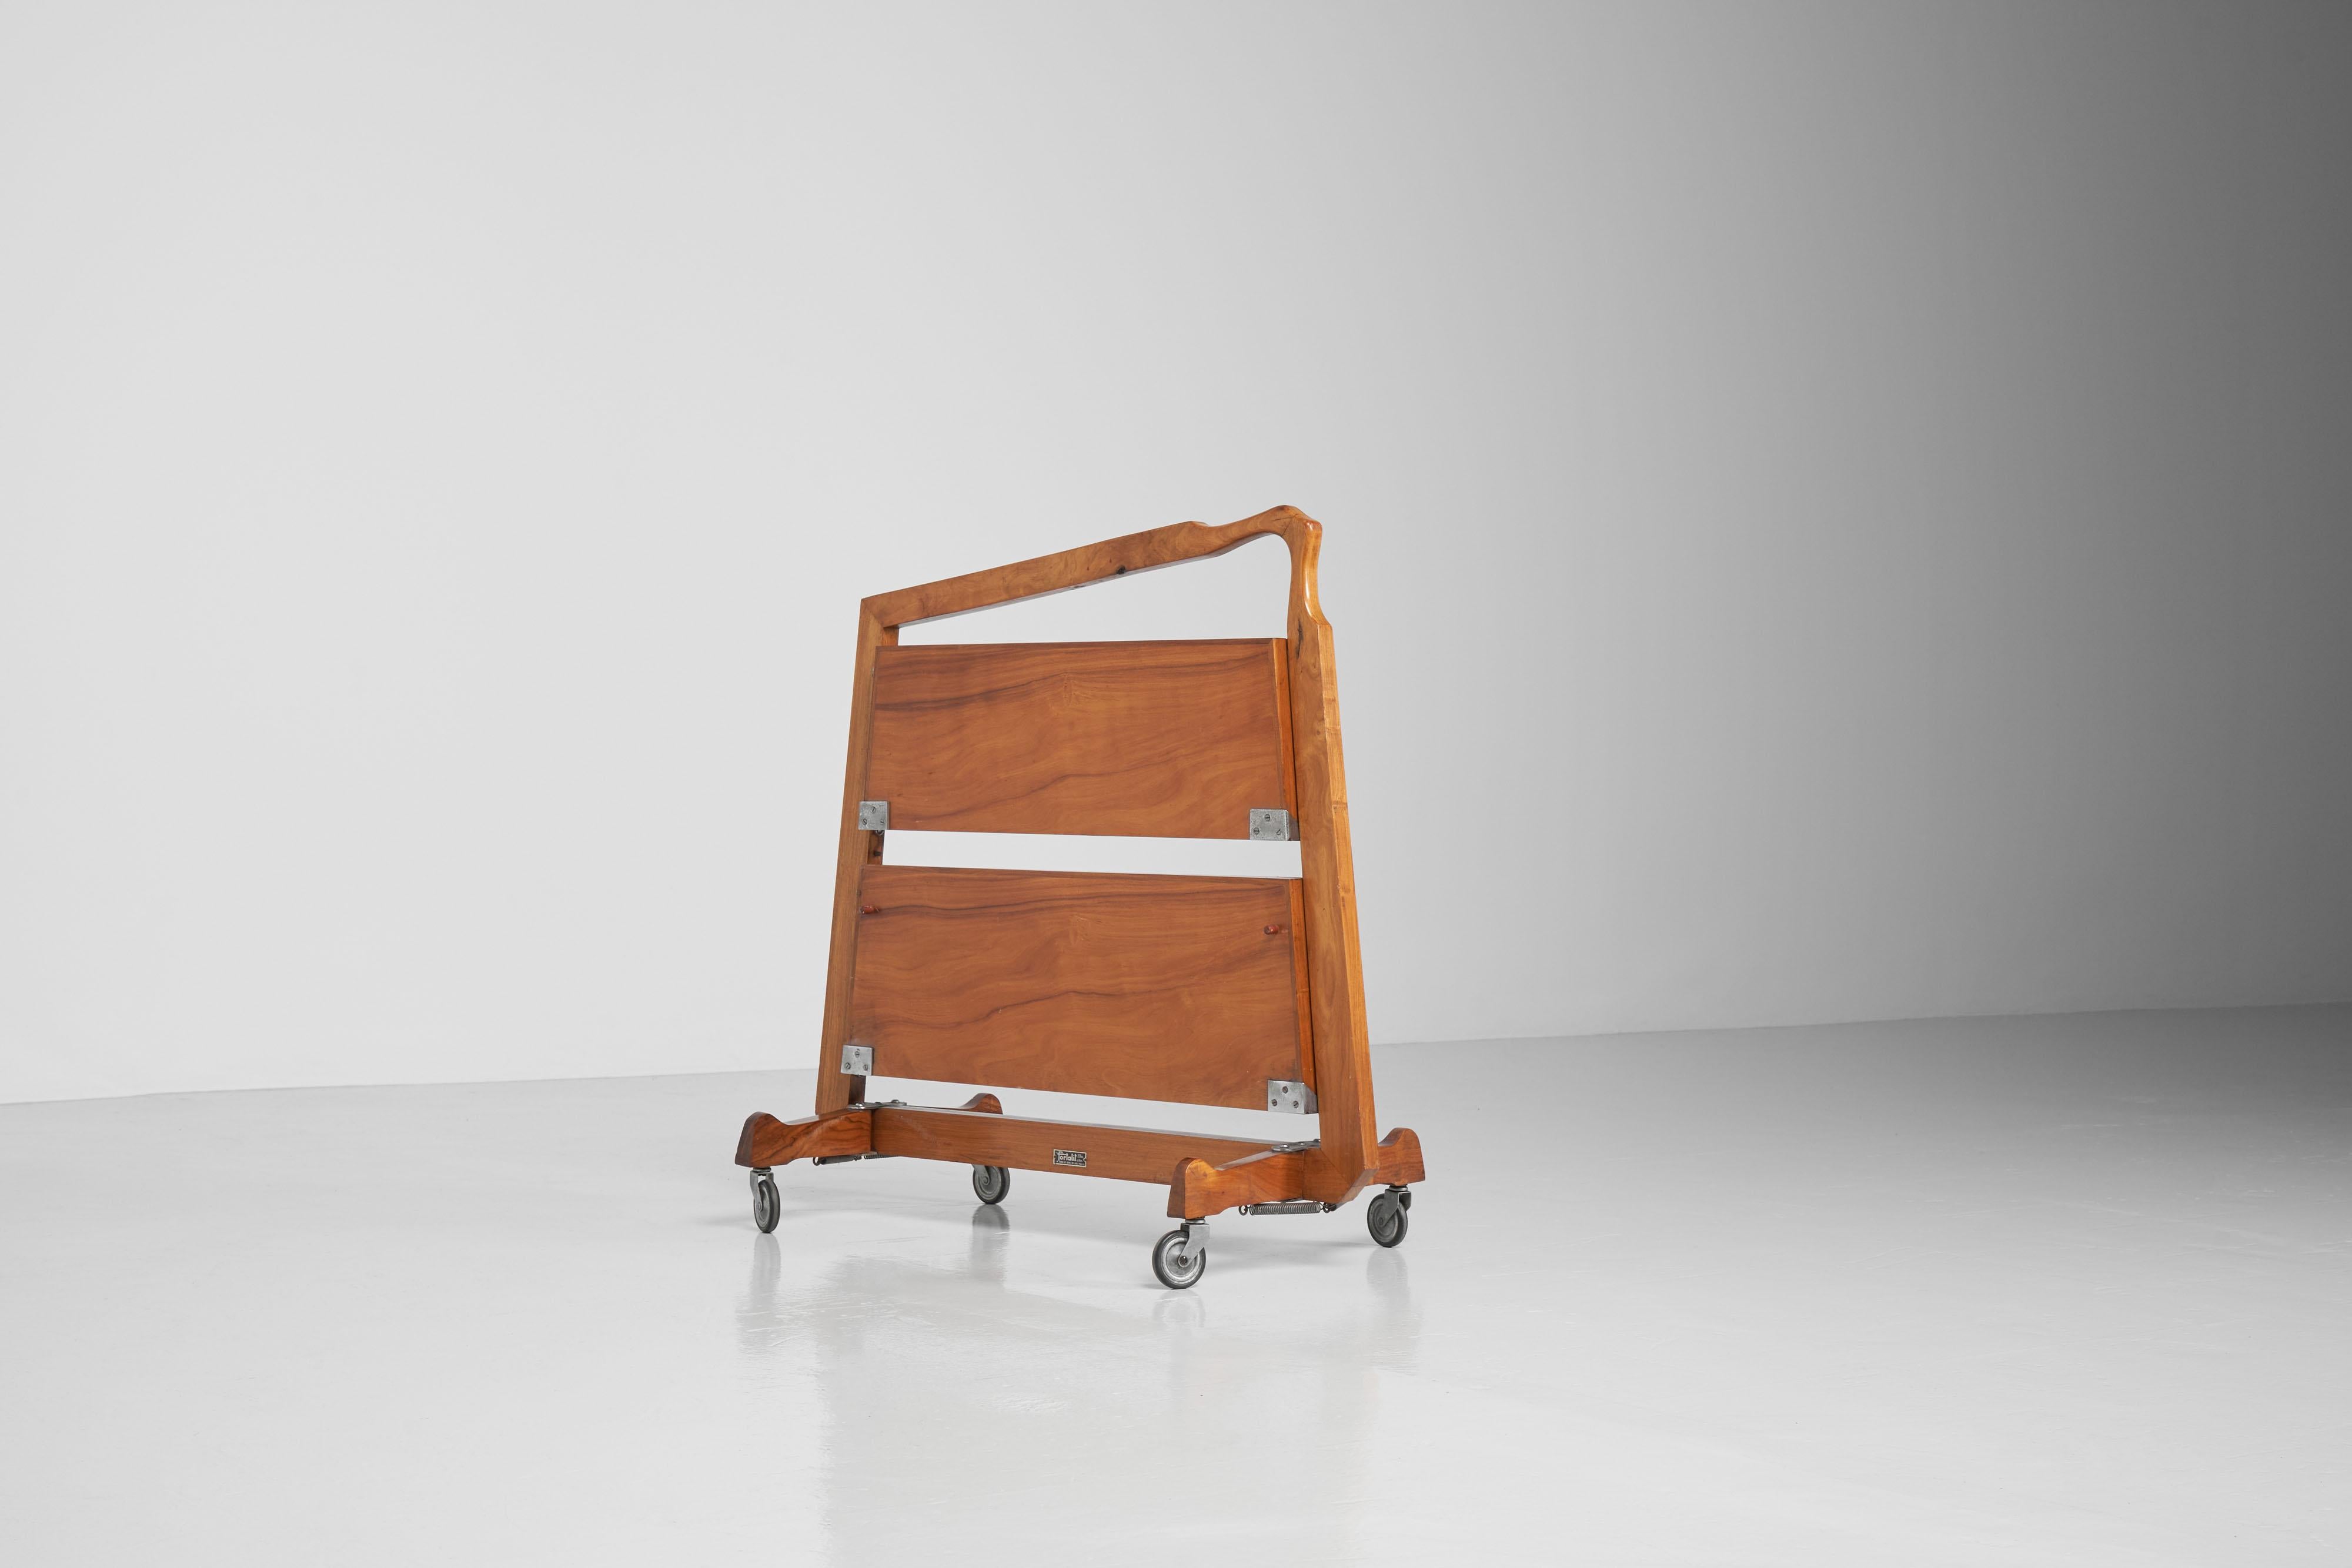 Sculptural shaped and foldable serving trolley designed and manufactured by Fortalit Ltda, Sao Paulo Brazil 1960. This stunning serving cart has an unusual but very sculptural shape, a symmetrical. The clear lines in the design make this piece very